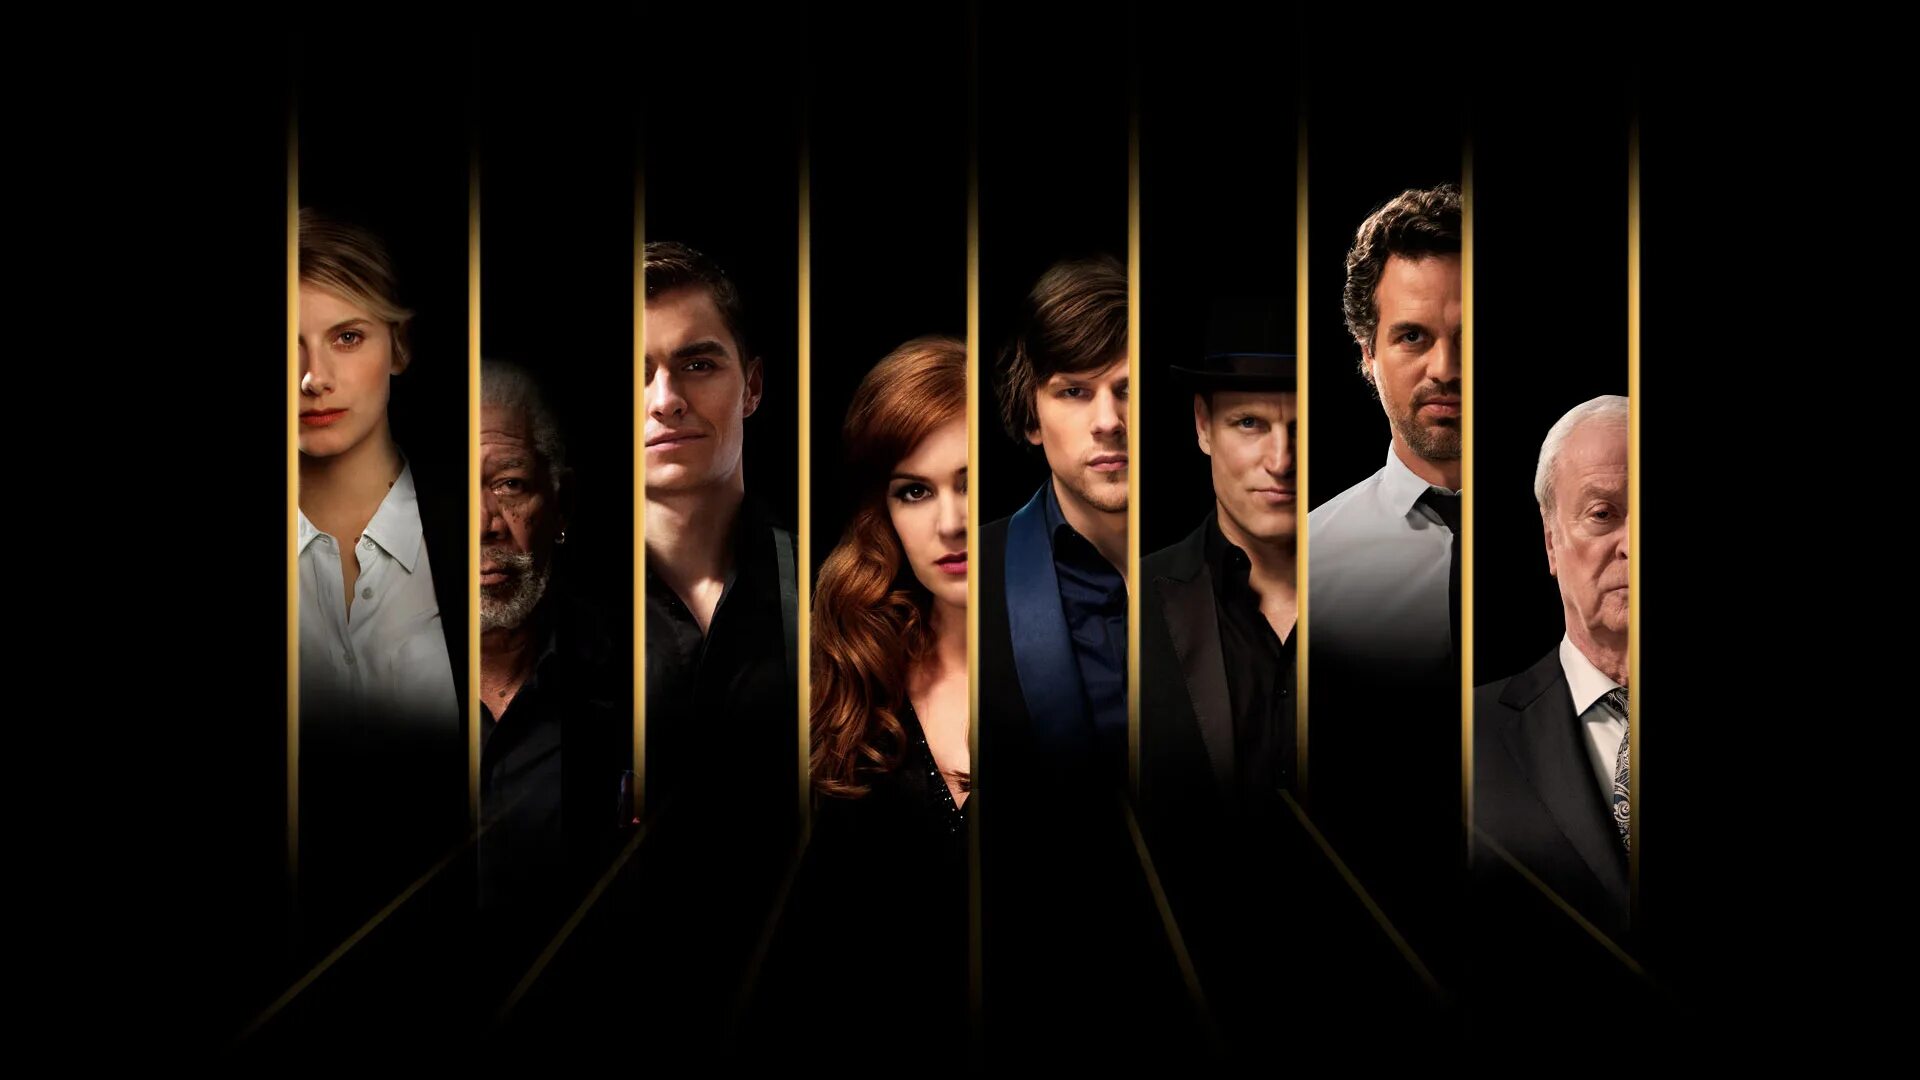 Now you see me 2013 poster. Стефани Онор иллюзия обмана. Now you see me иллюзия обмана. Сколько частей обмана